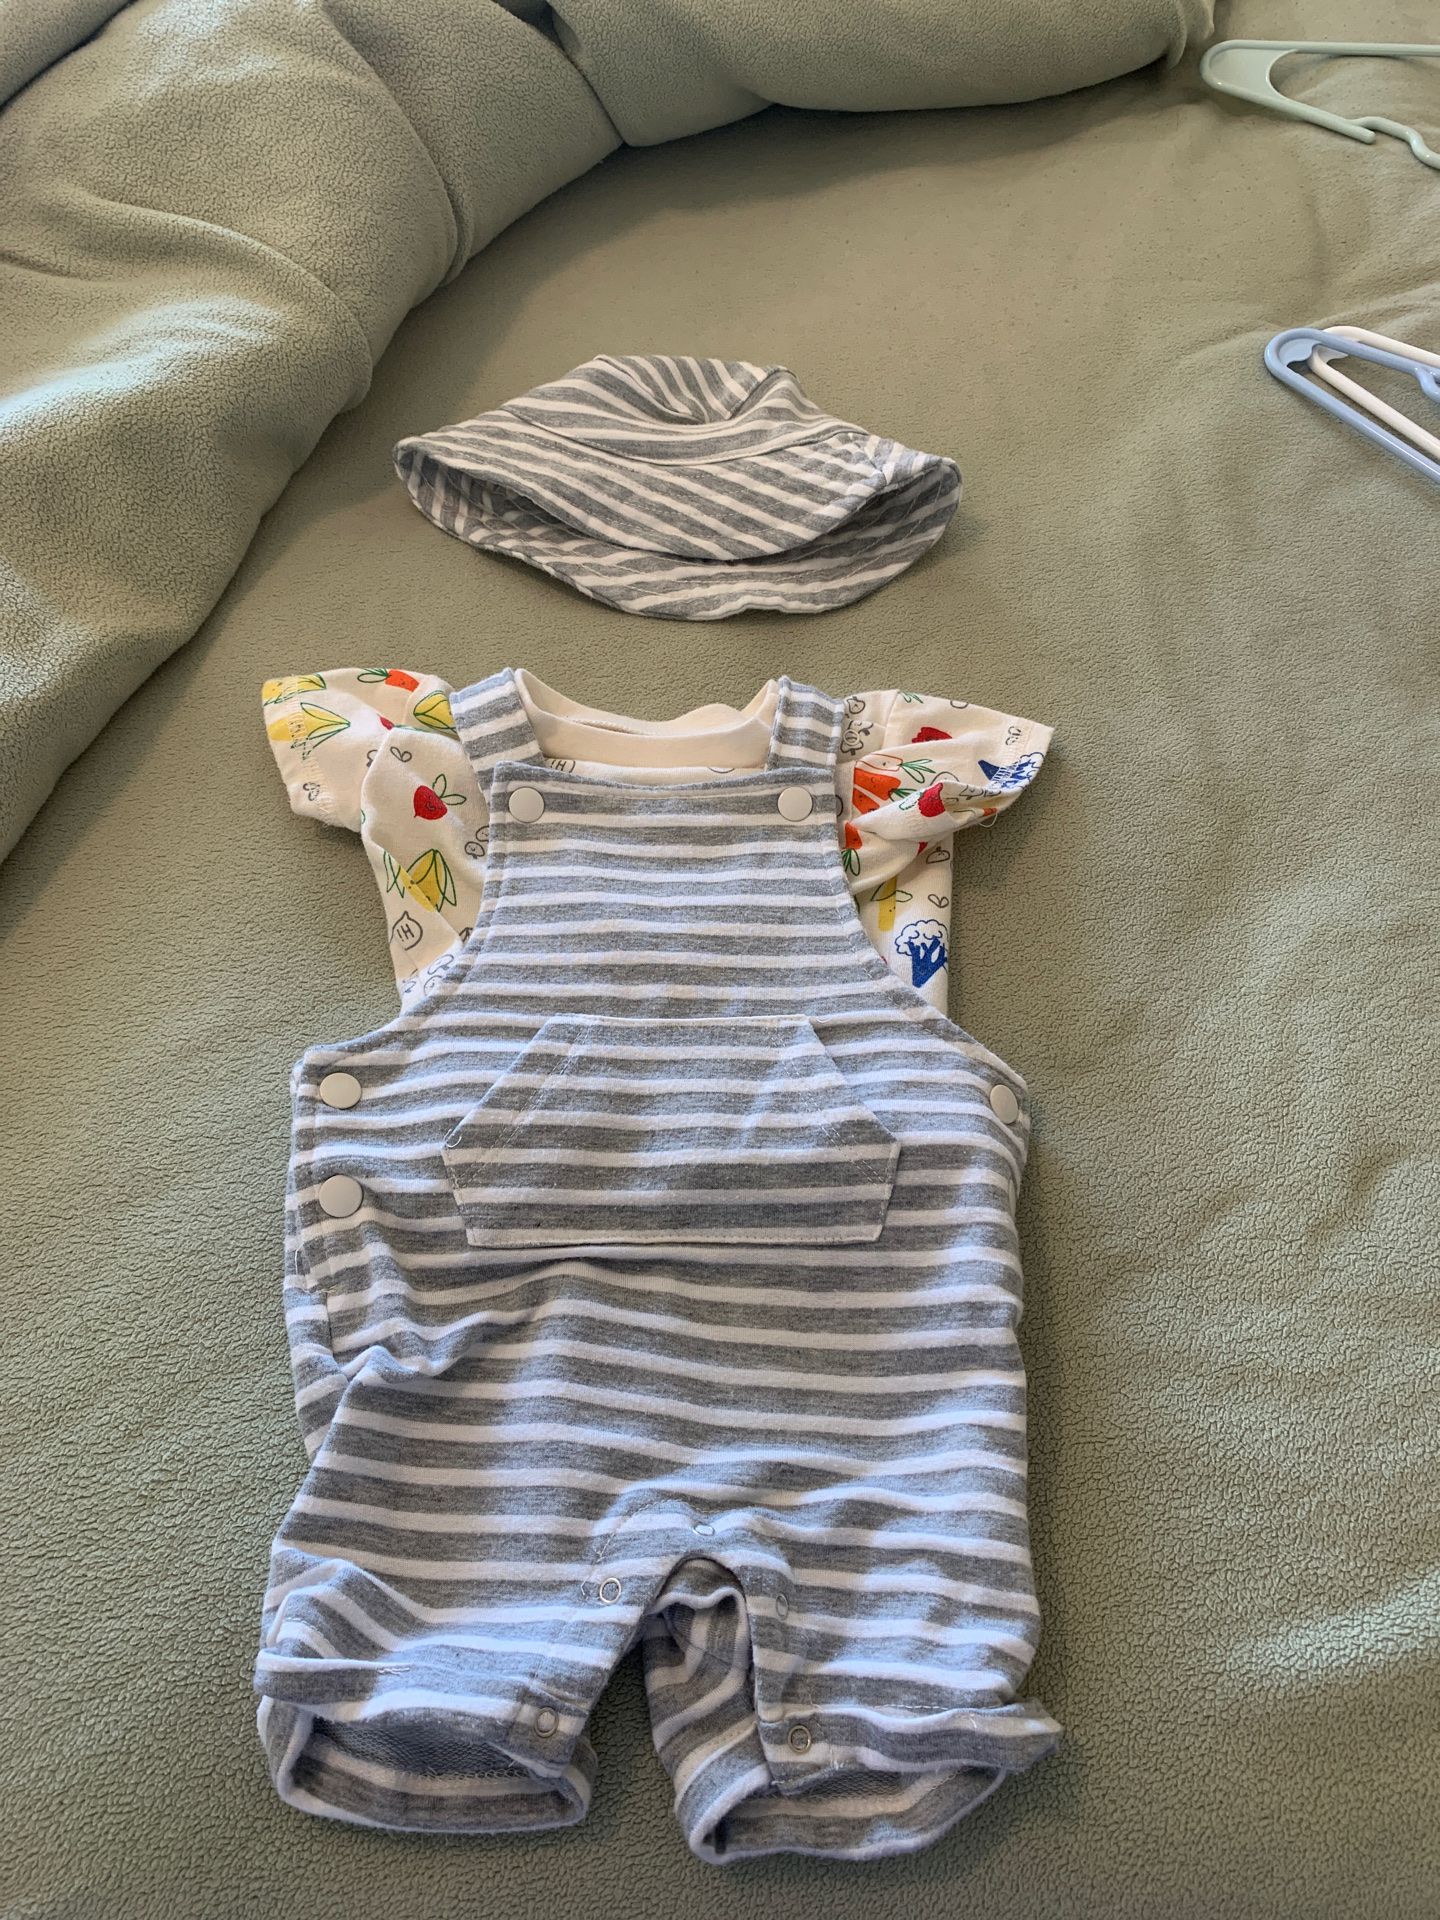 Baby clothes 0-3 month